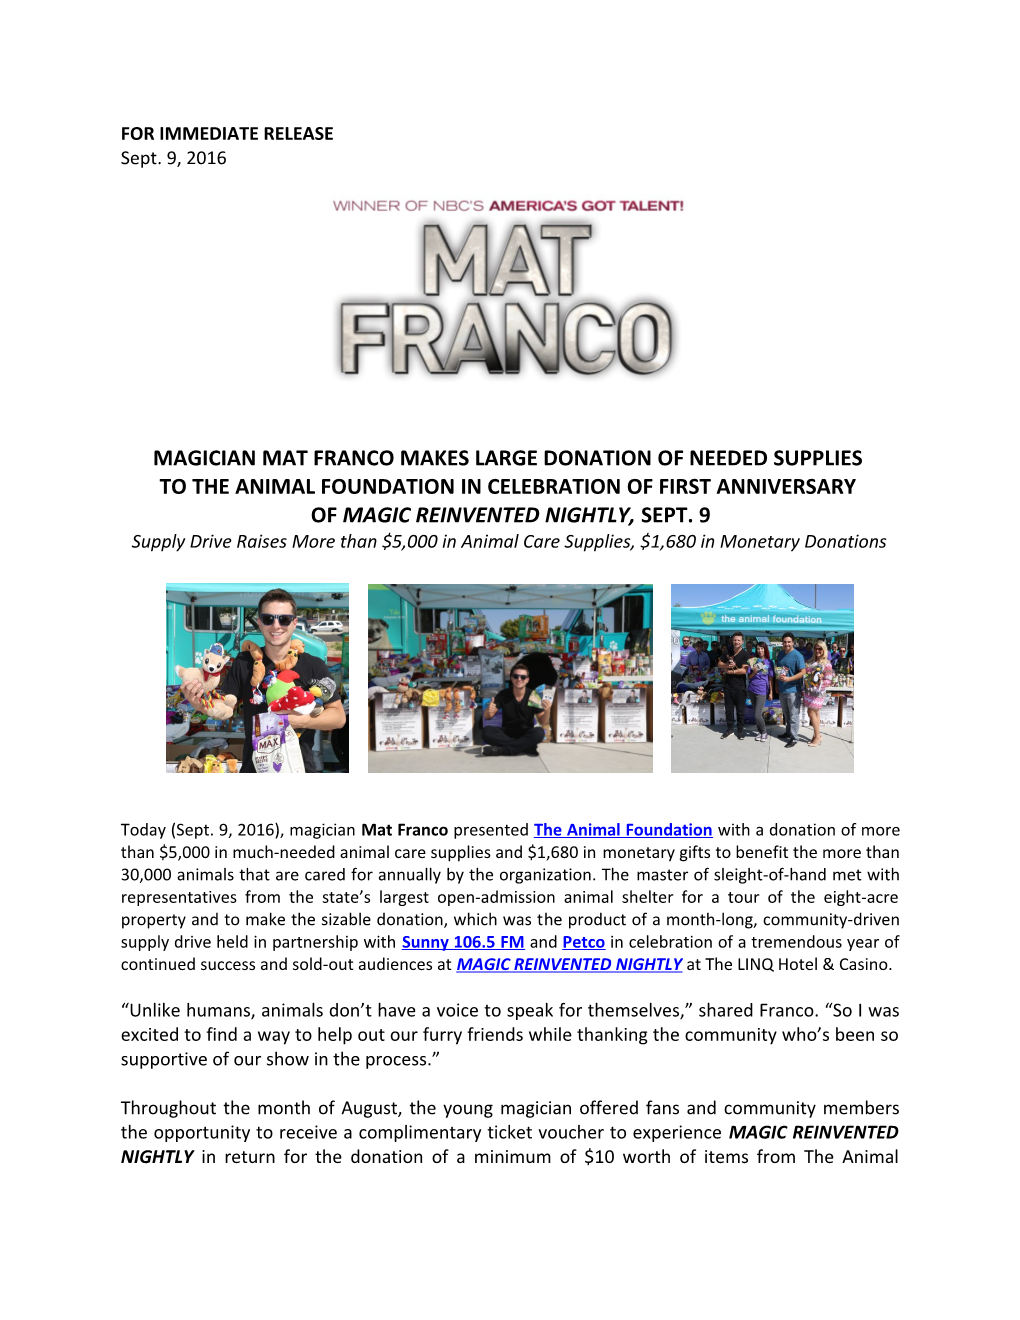 Magician Mat Franco Makes Large Donation of Needed Supplies